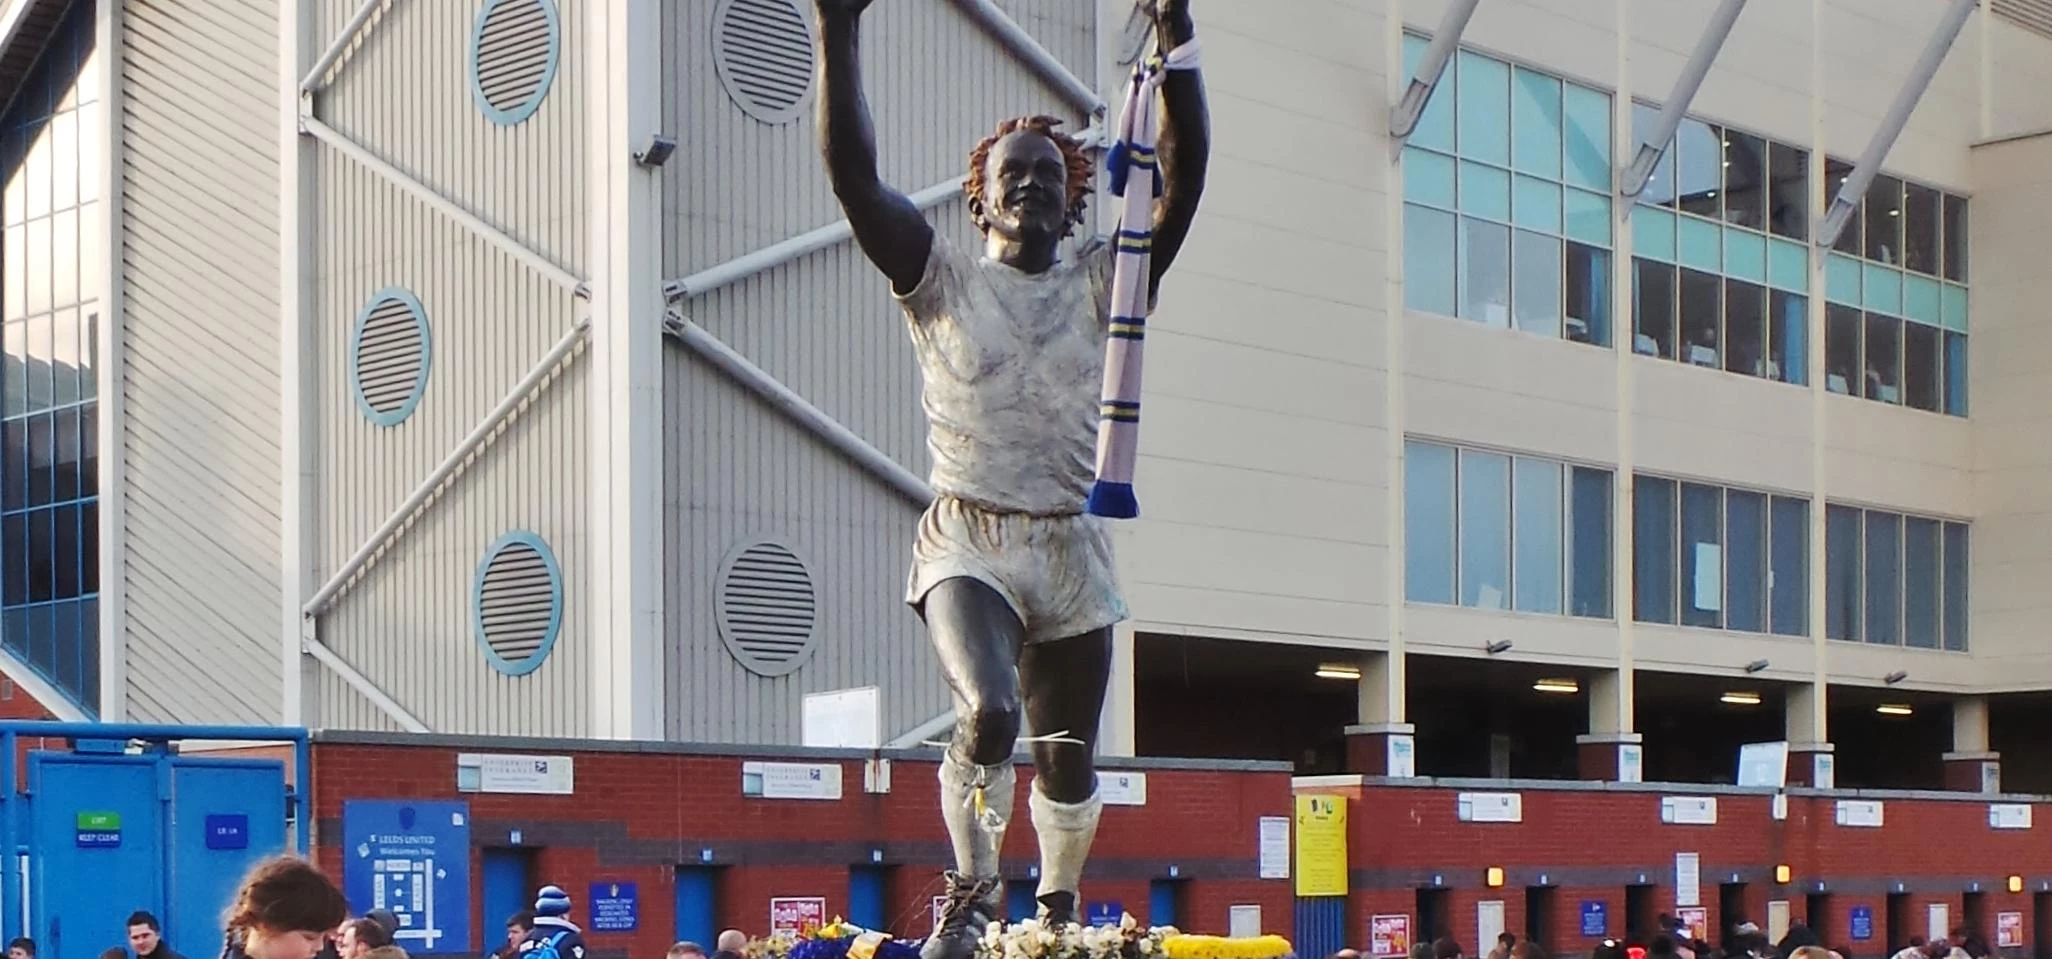 Leeds United - Elland Road - Feb 2015 - Never Forget Your Heroes